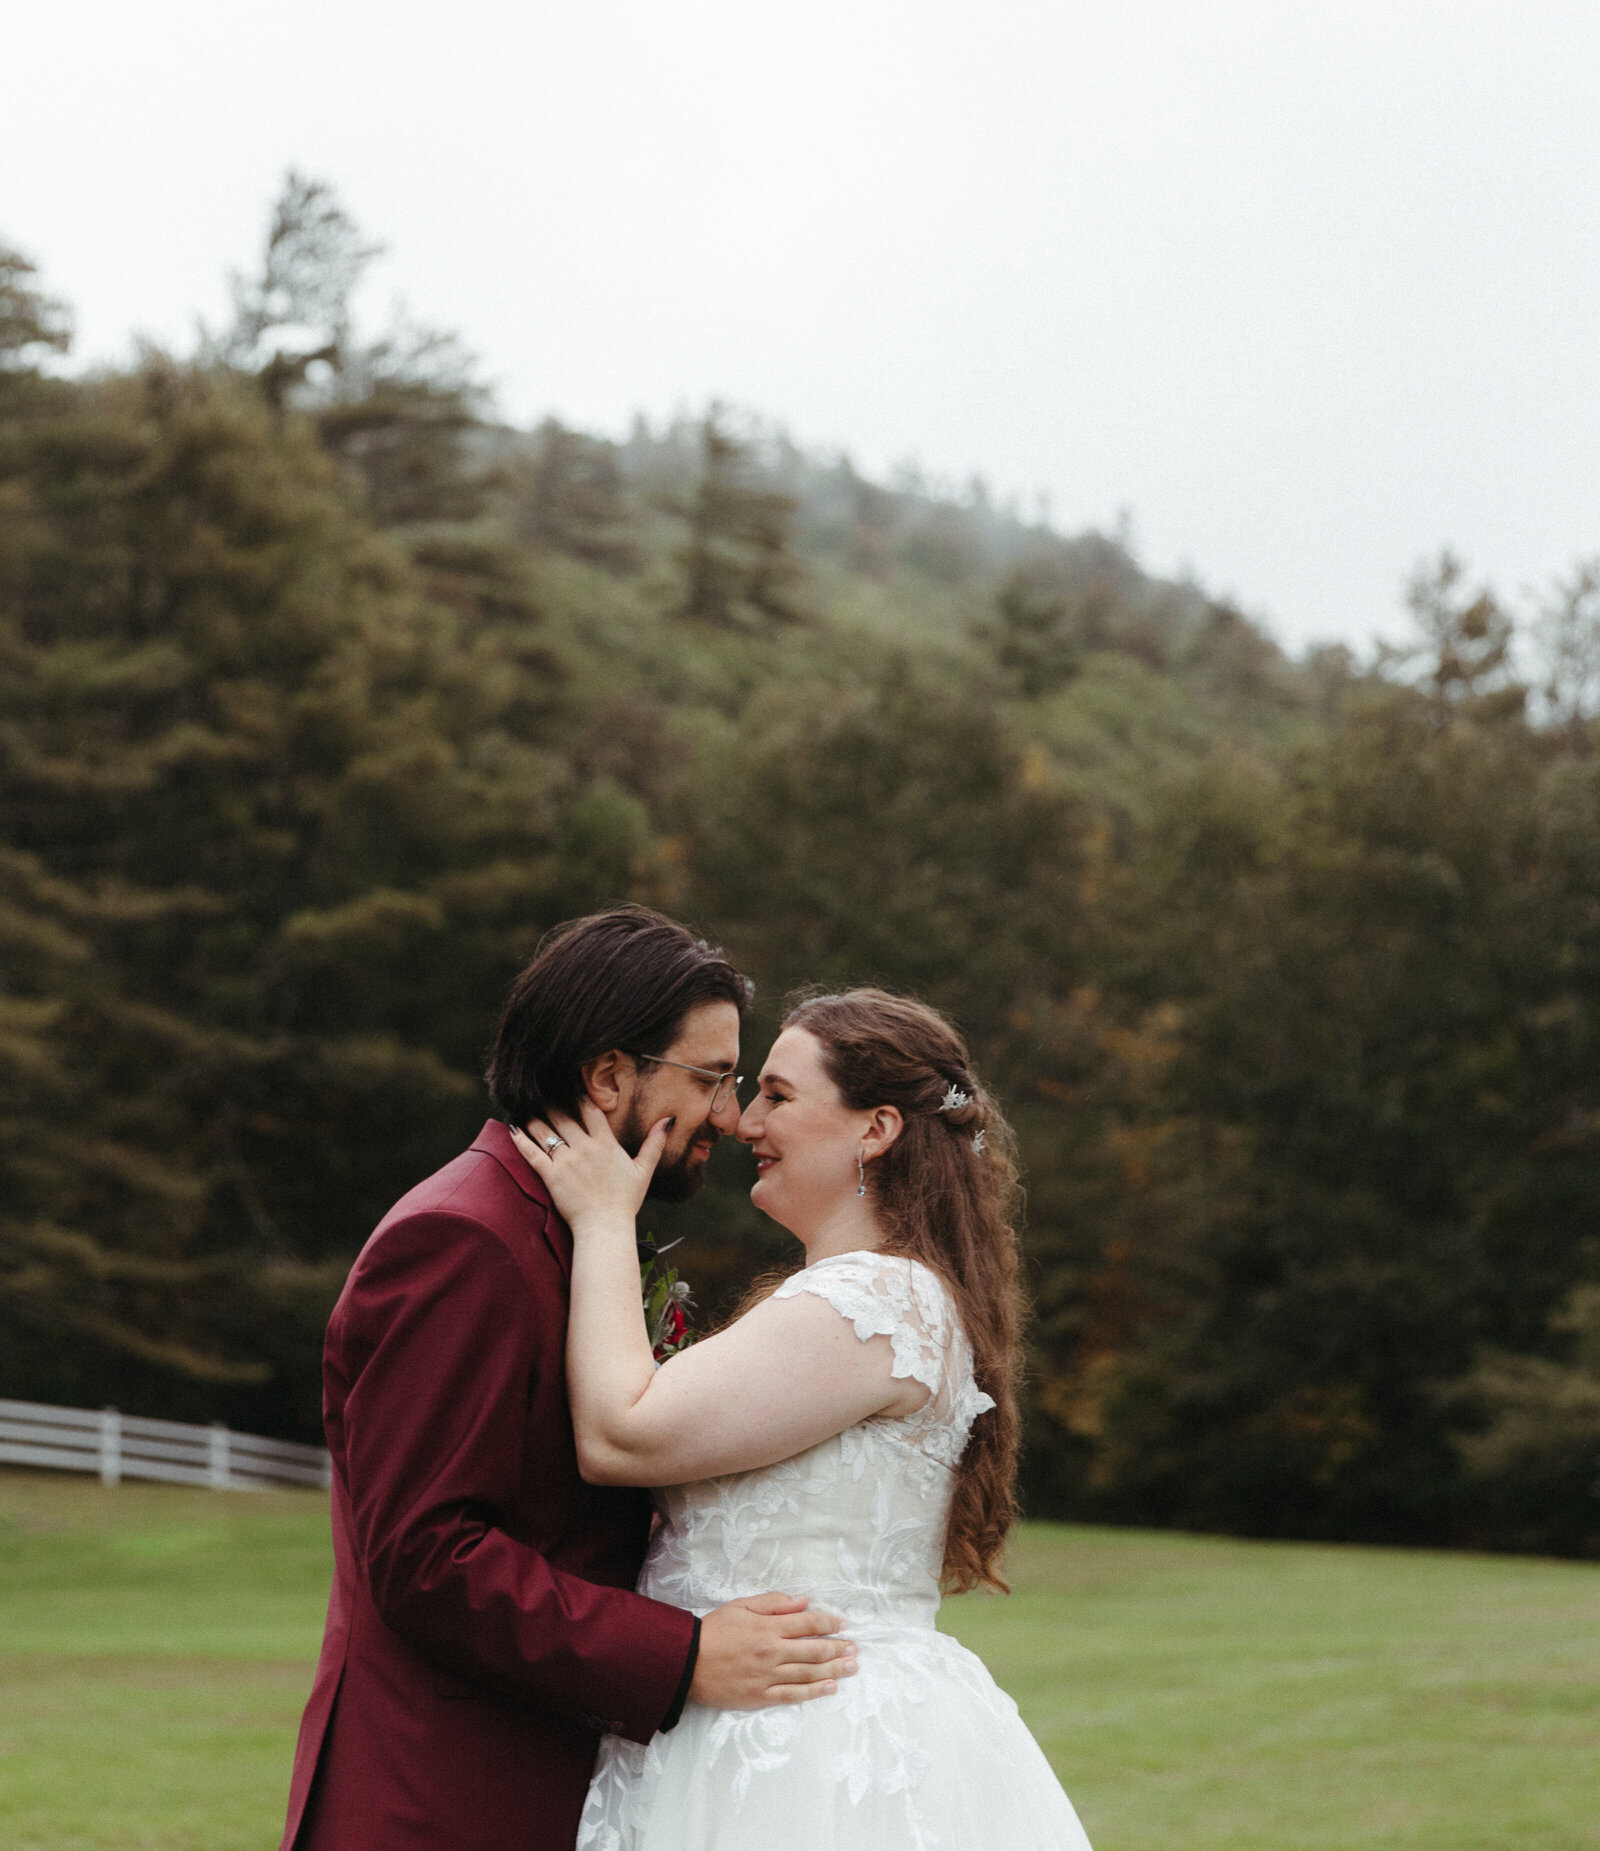 New England couple  kissing in a field